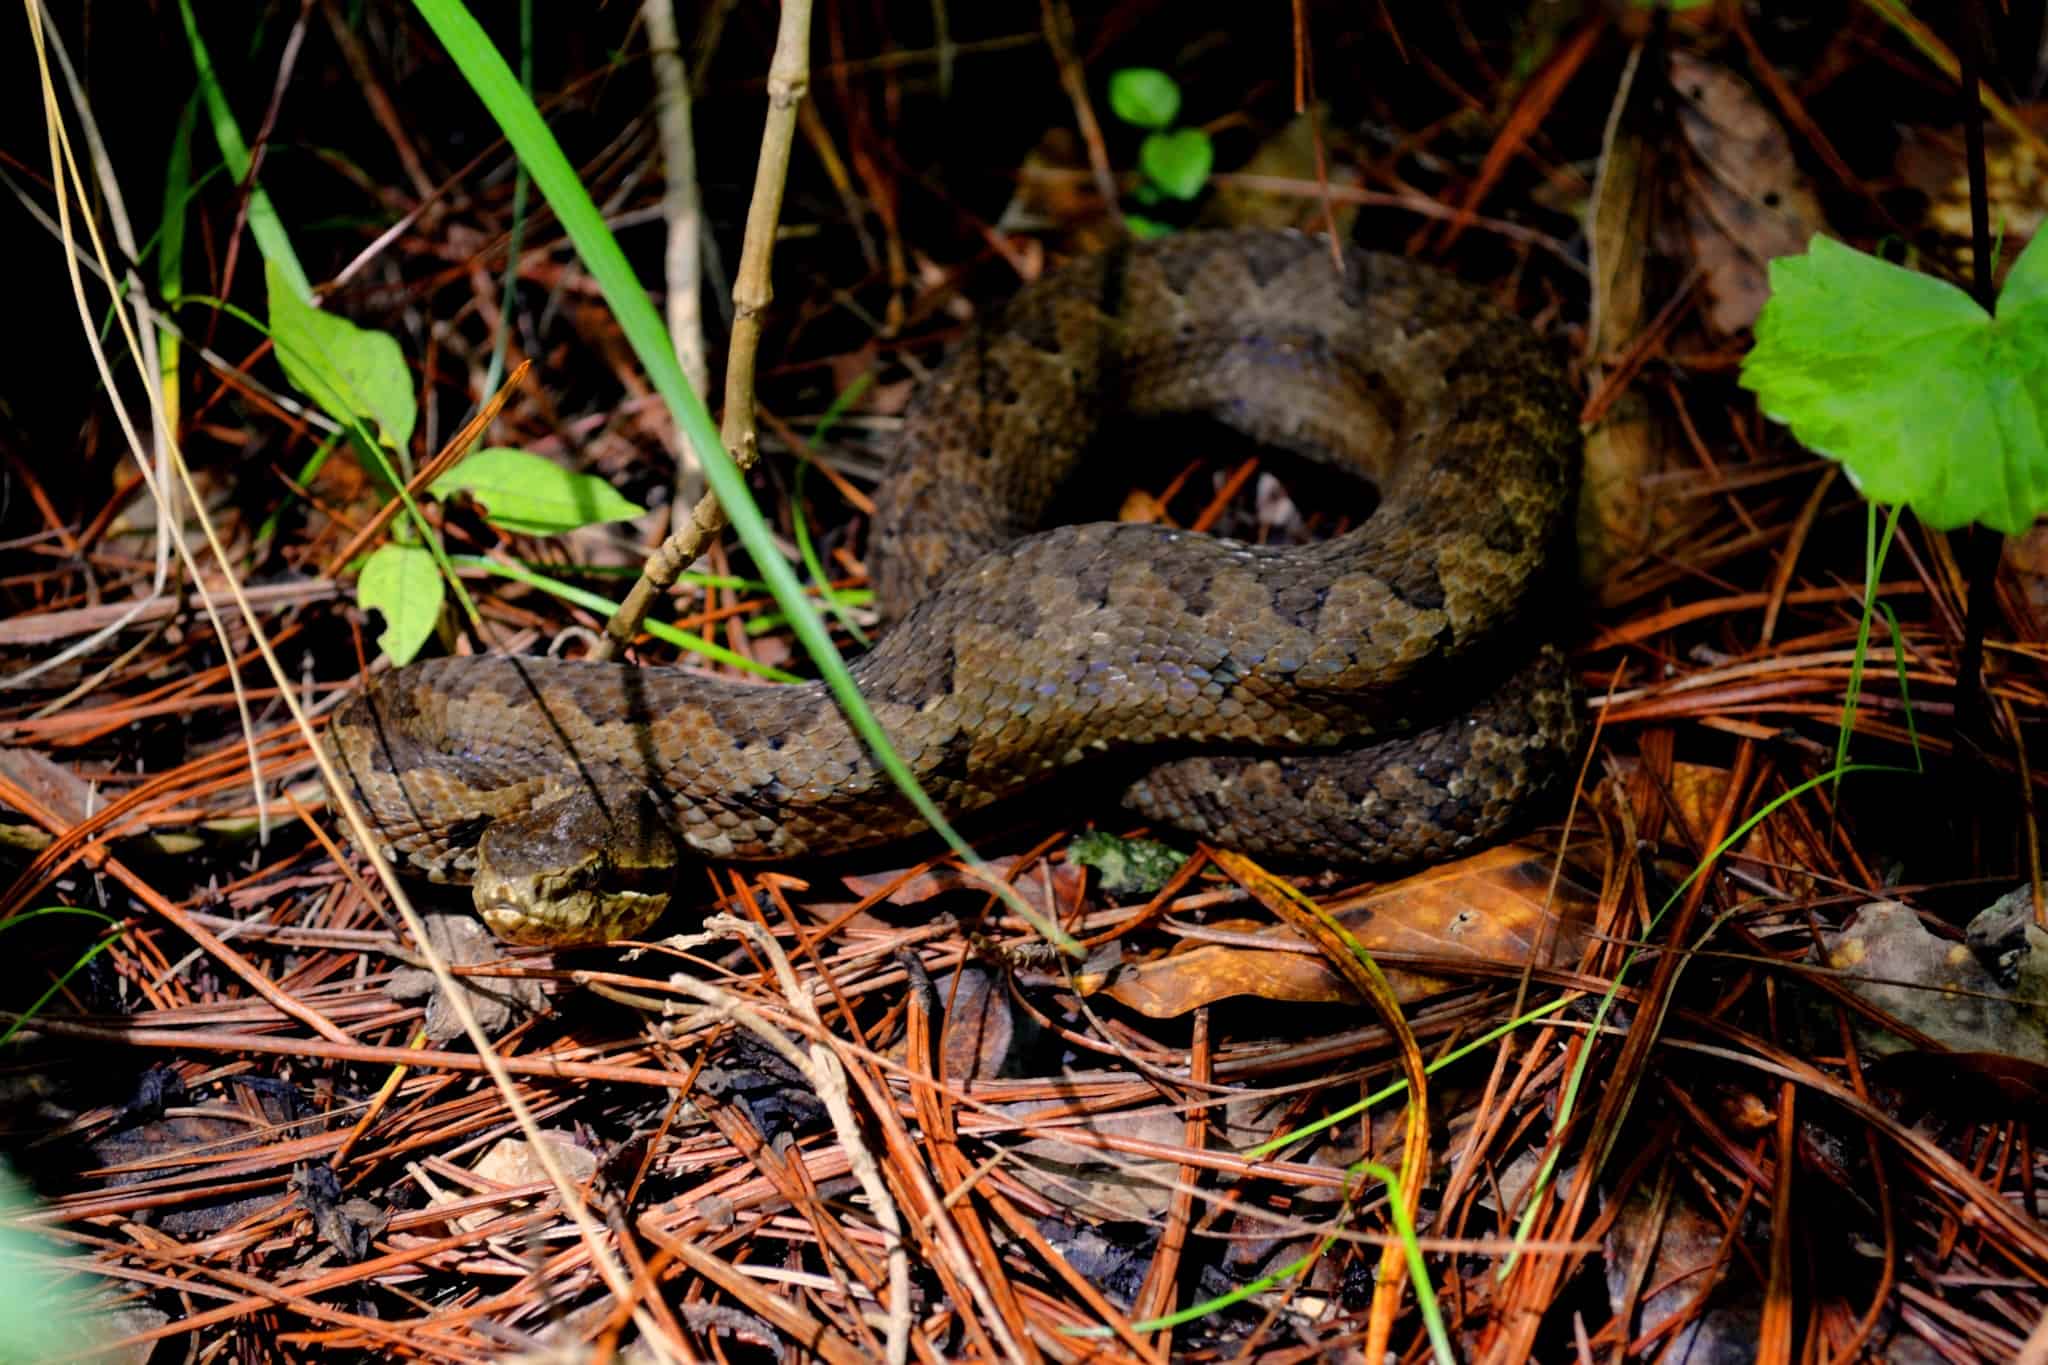 The Tzotzil montane pit viper is named for the Tzitzil people who share its range.